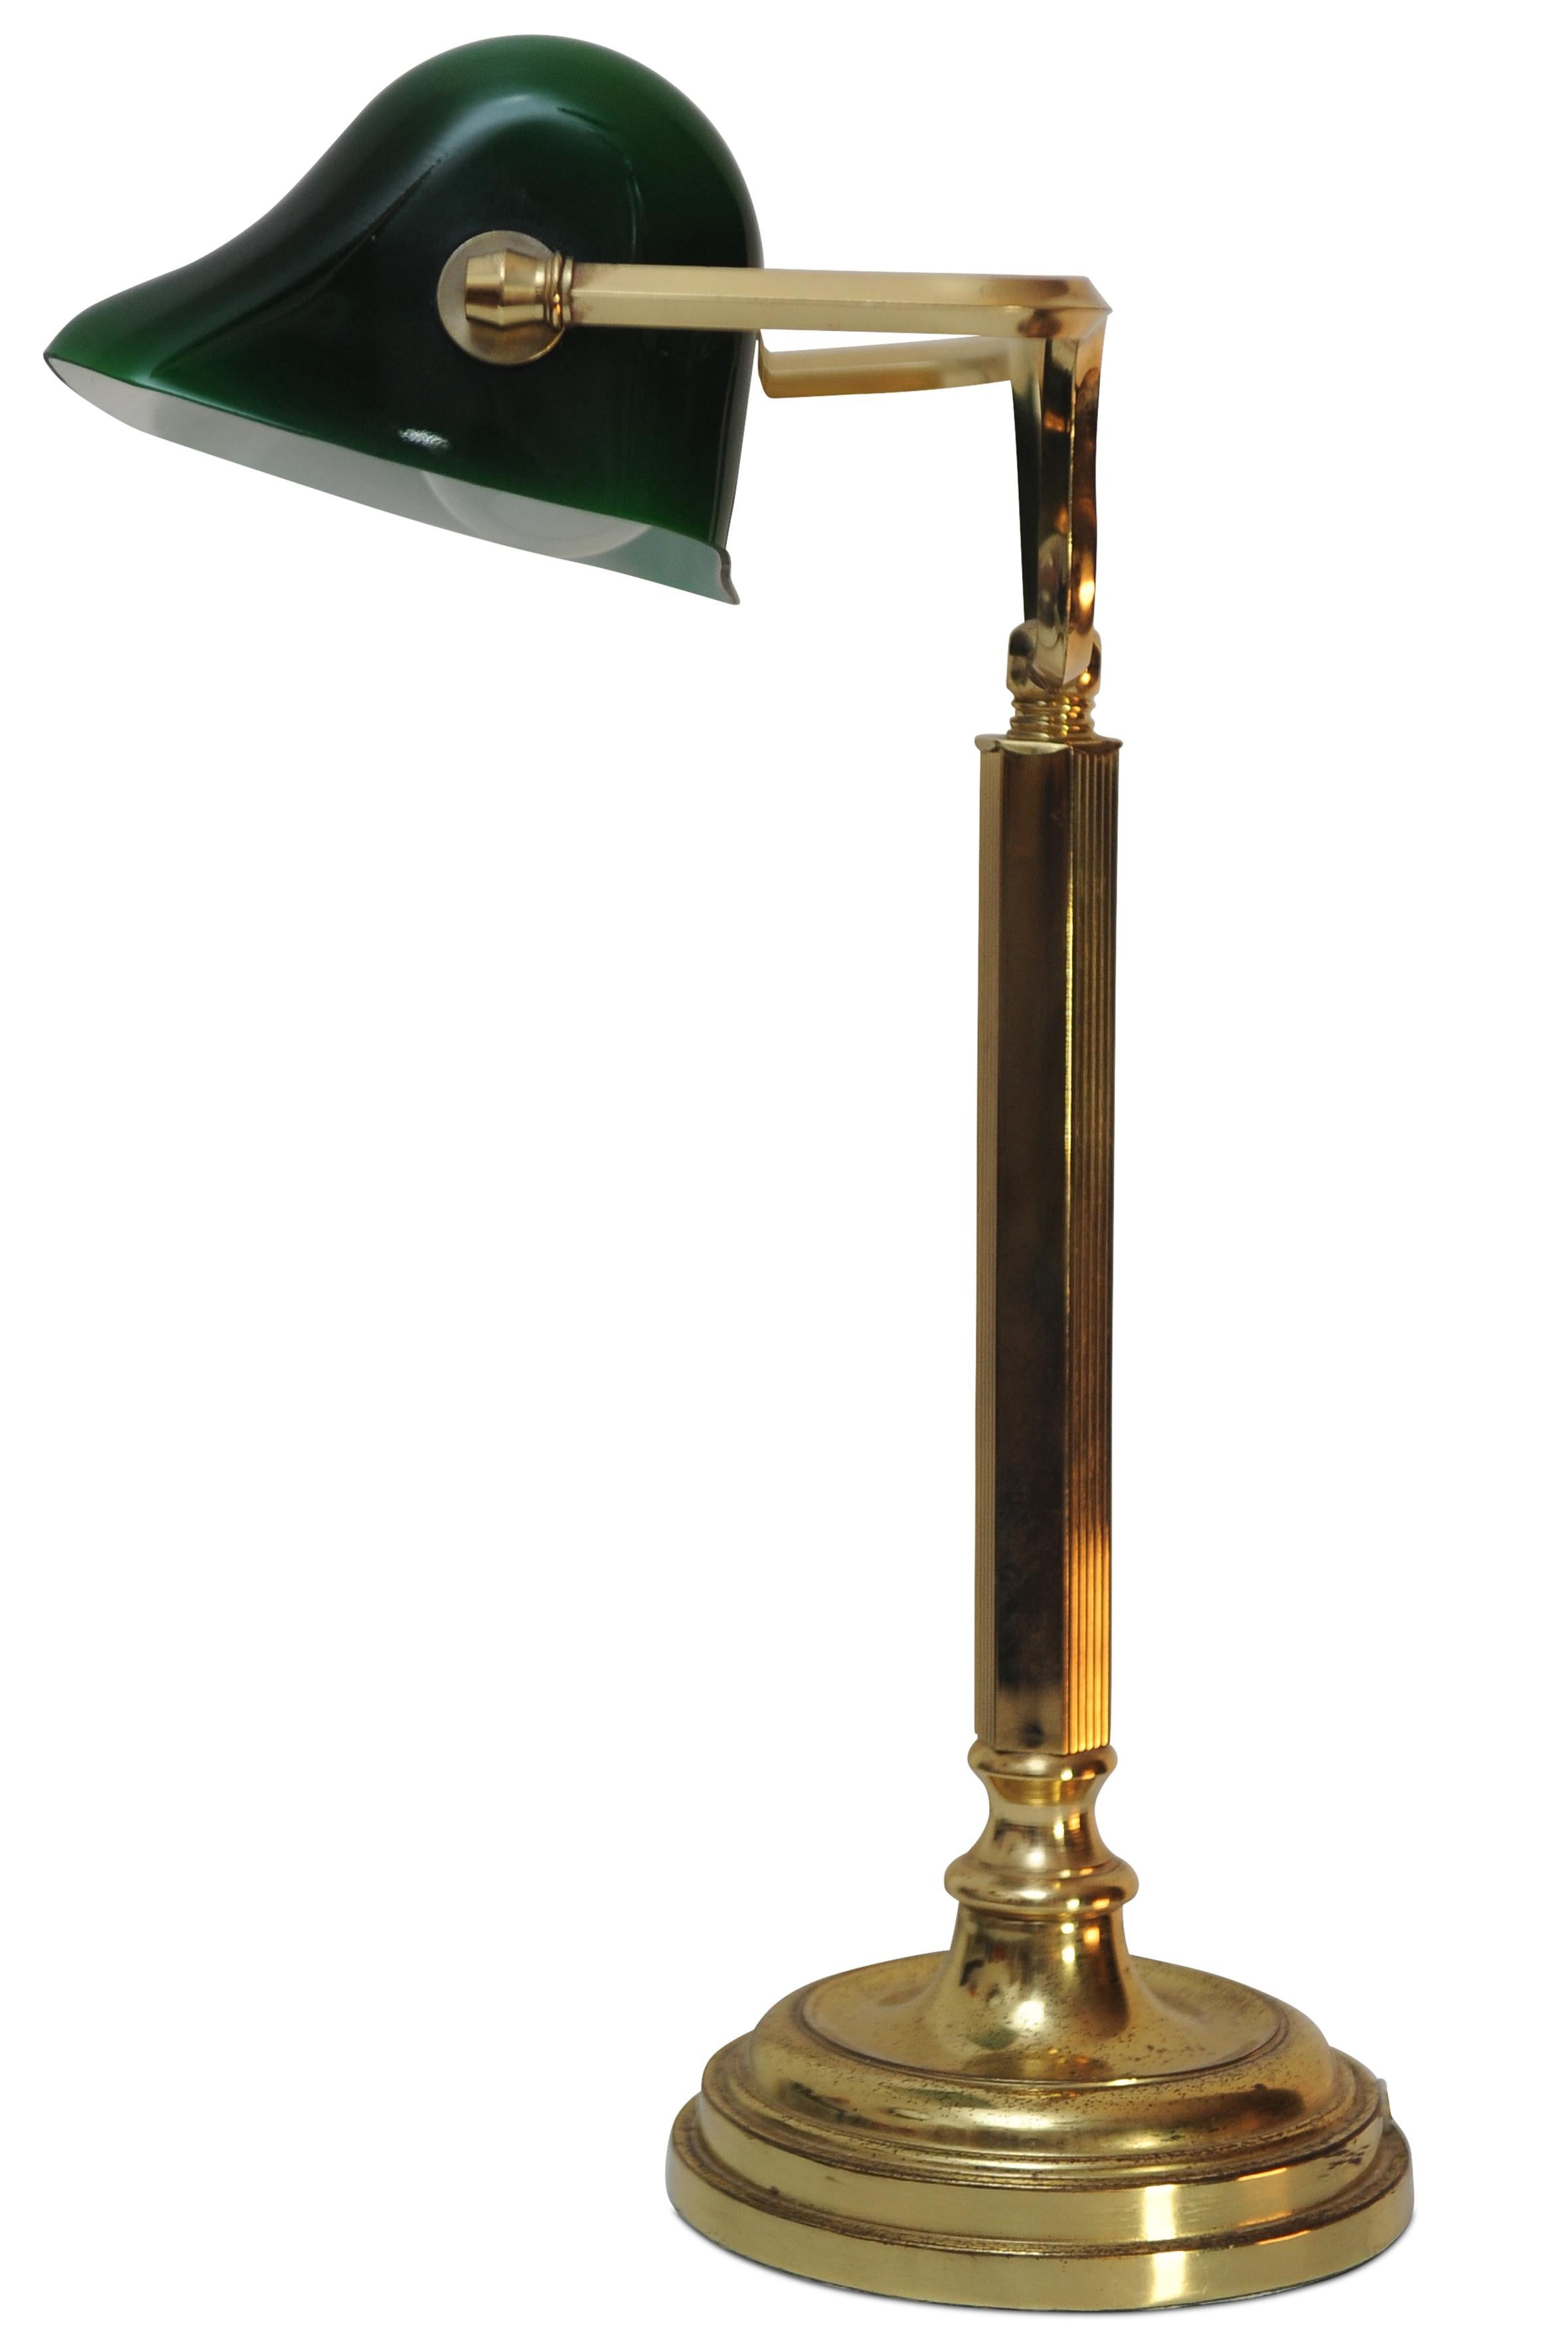 An Iconic Antique Green Brass Bankers Lamp With Brass Adjustable Shade, Heavy Brass Stand and Baize Bottom.
Ideal for any desk setting or reading side table.